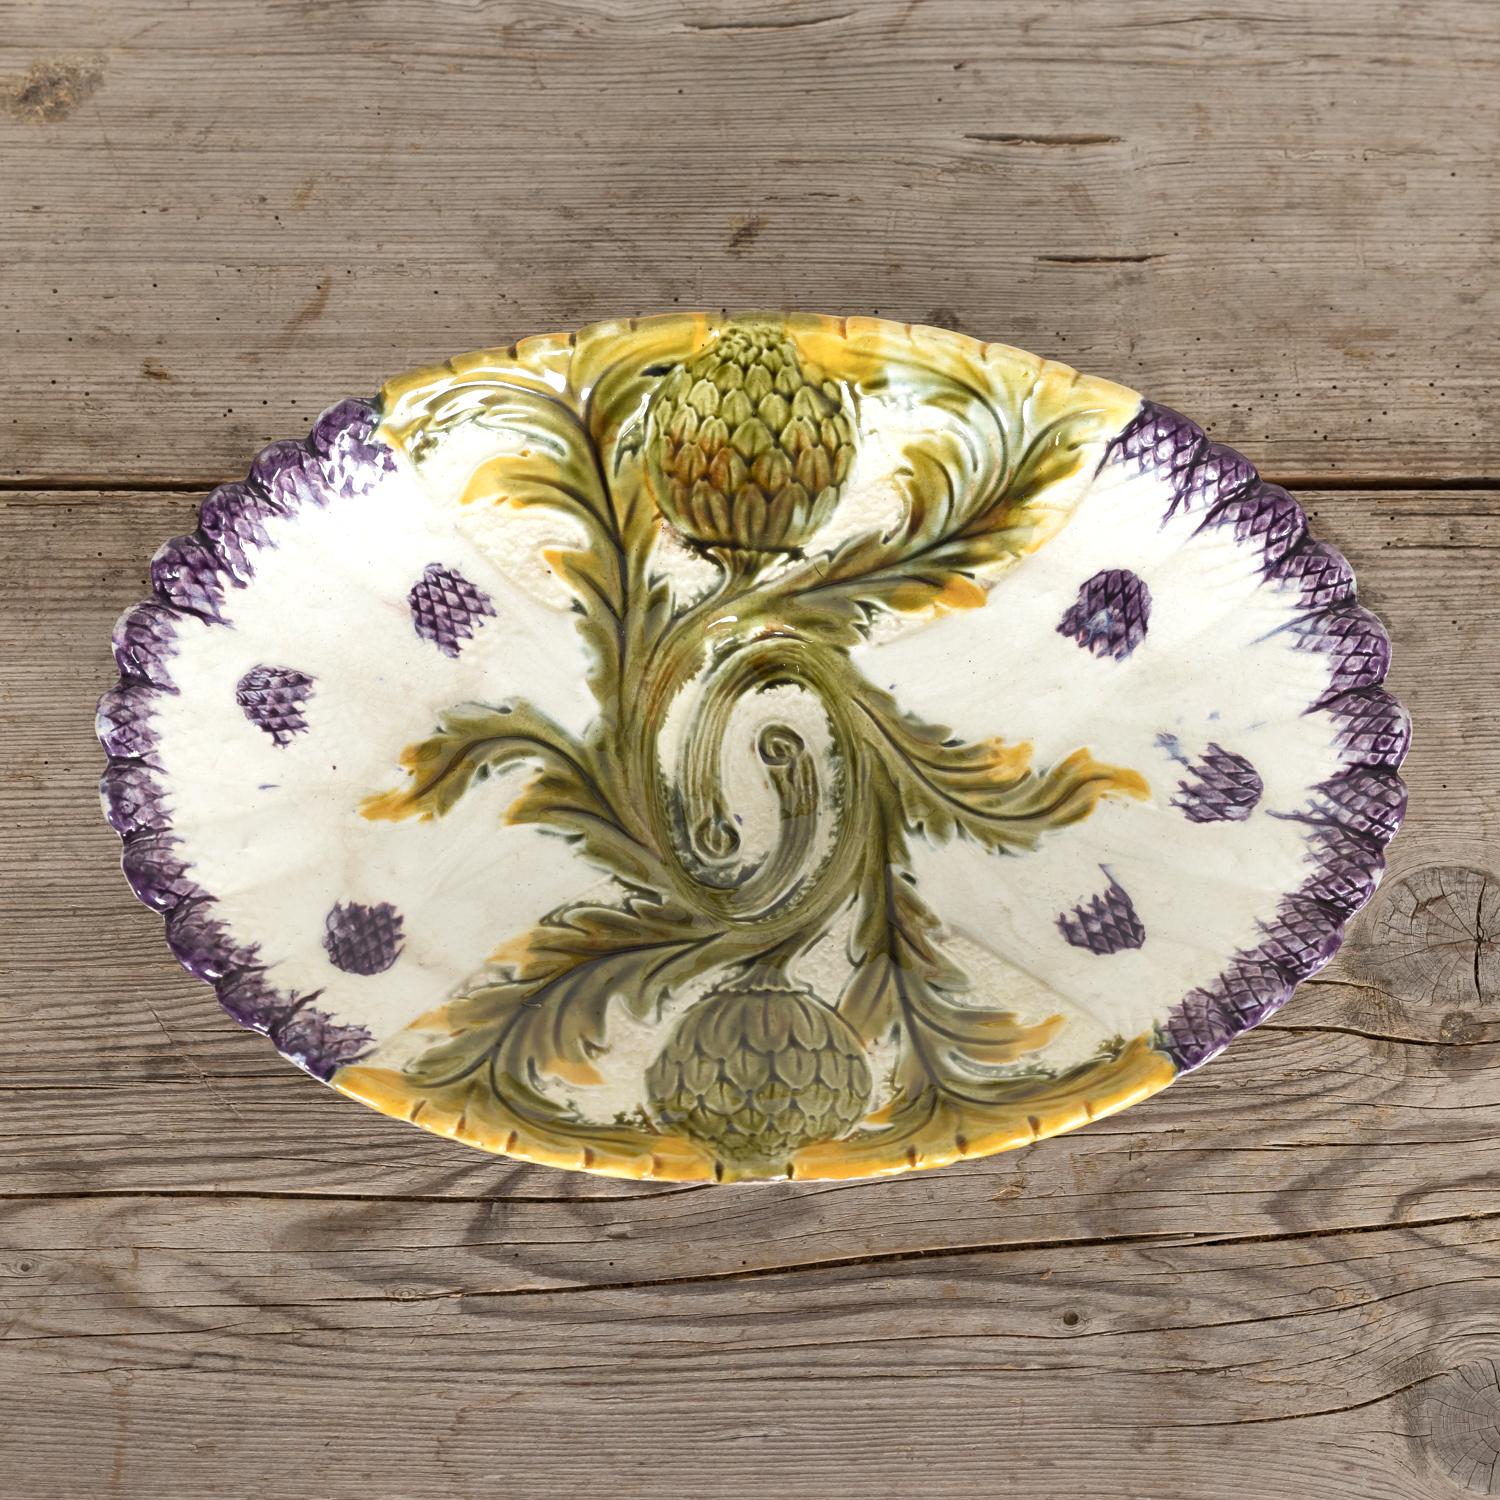 Glazed 10 French Orchies Faience Majolica Asparagus and Artichoke Plates with Platter For Sale